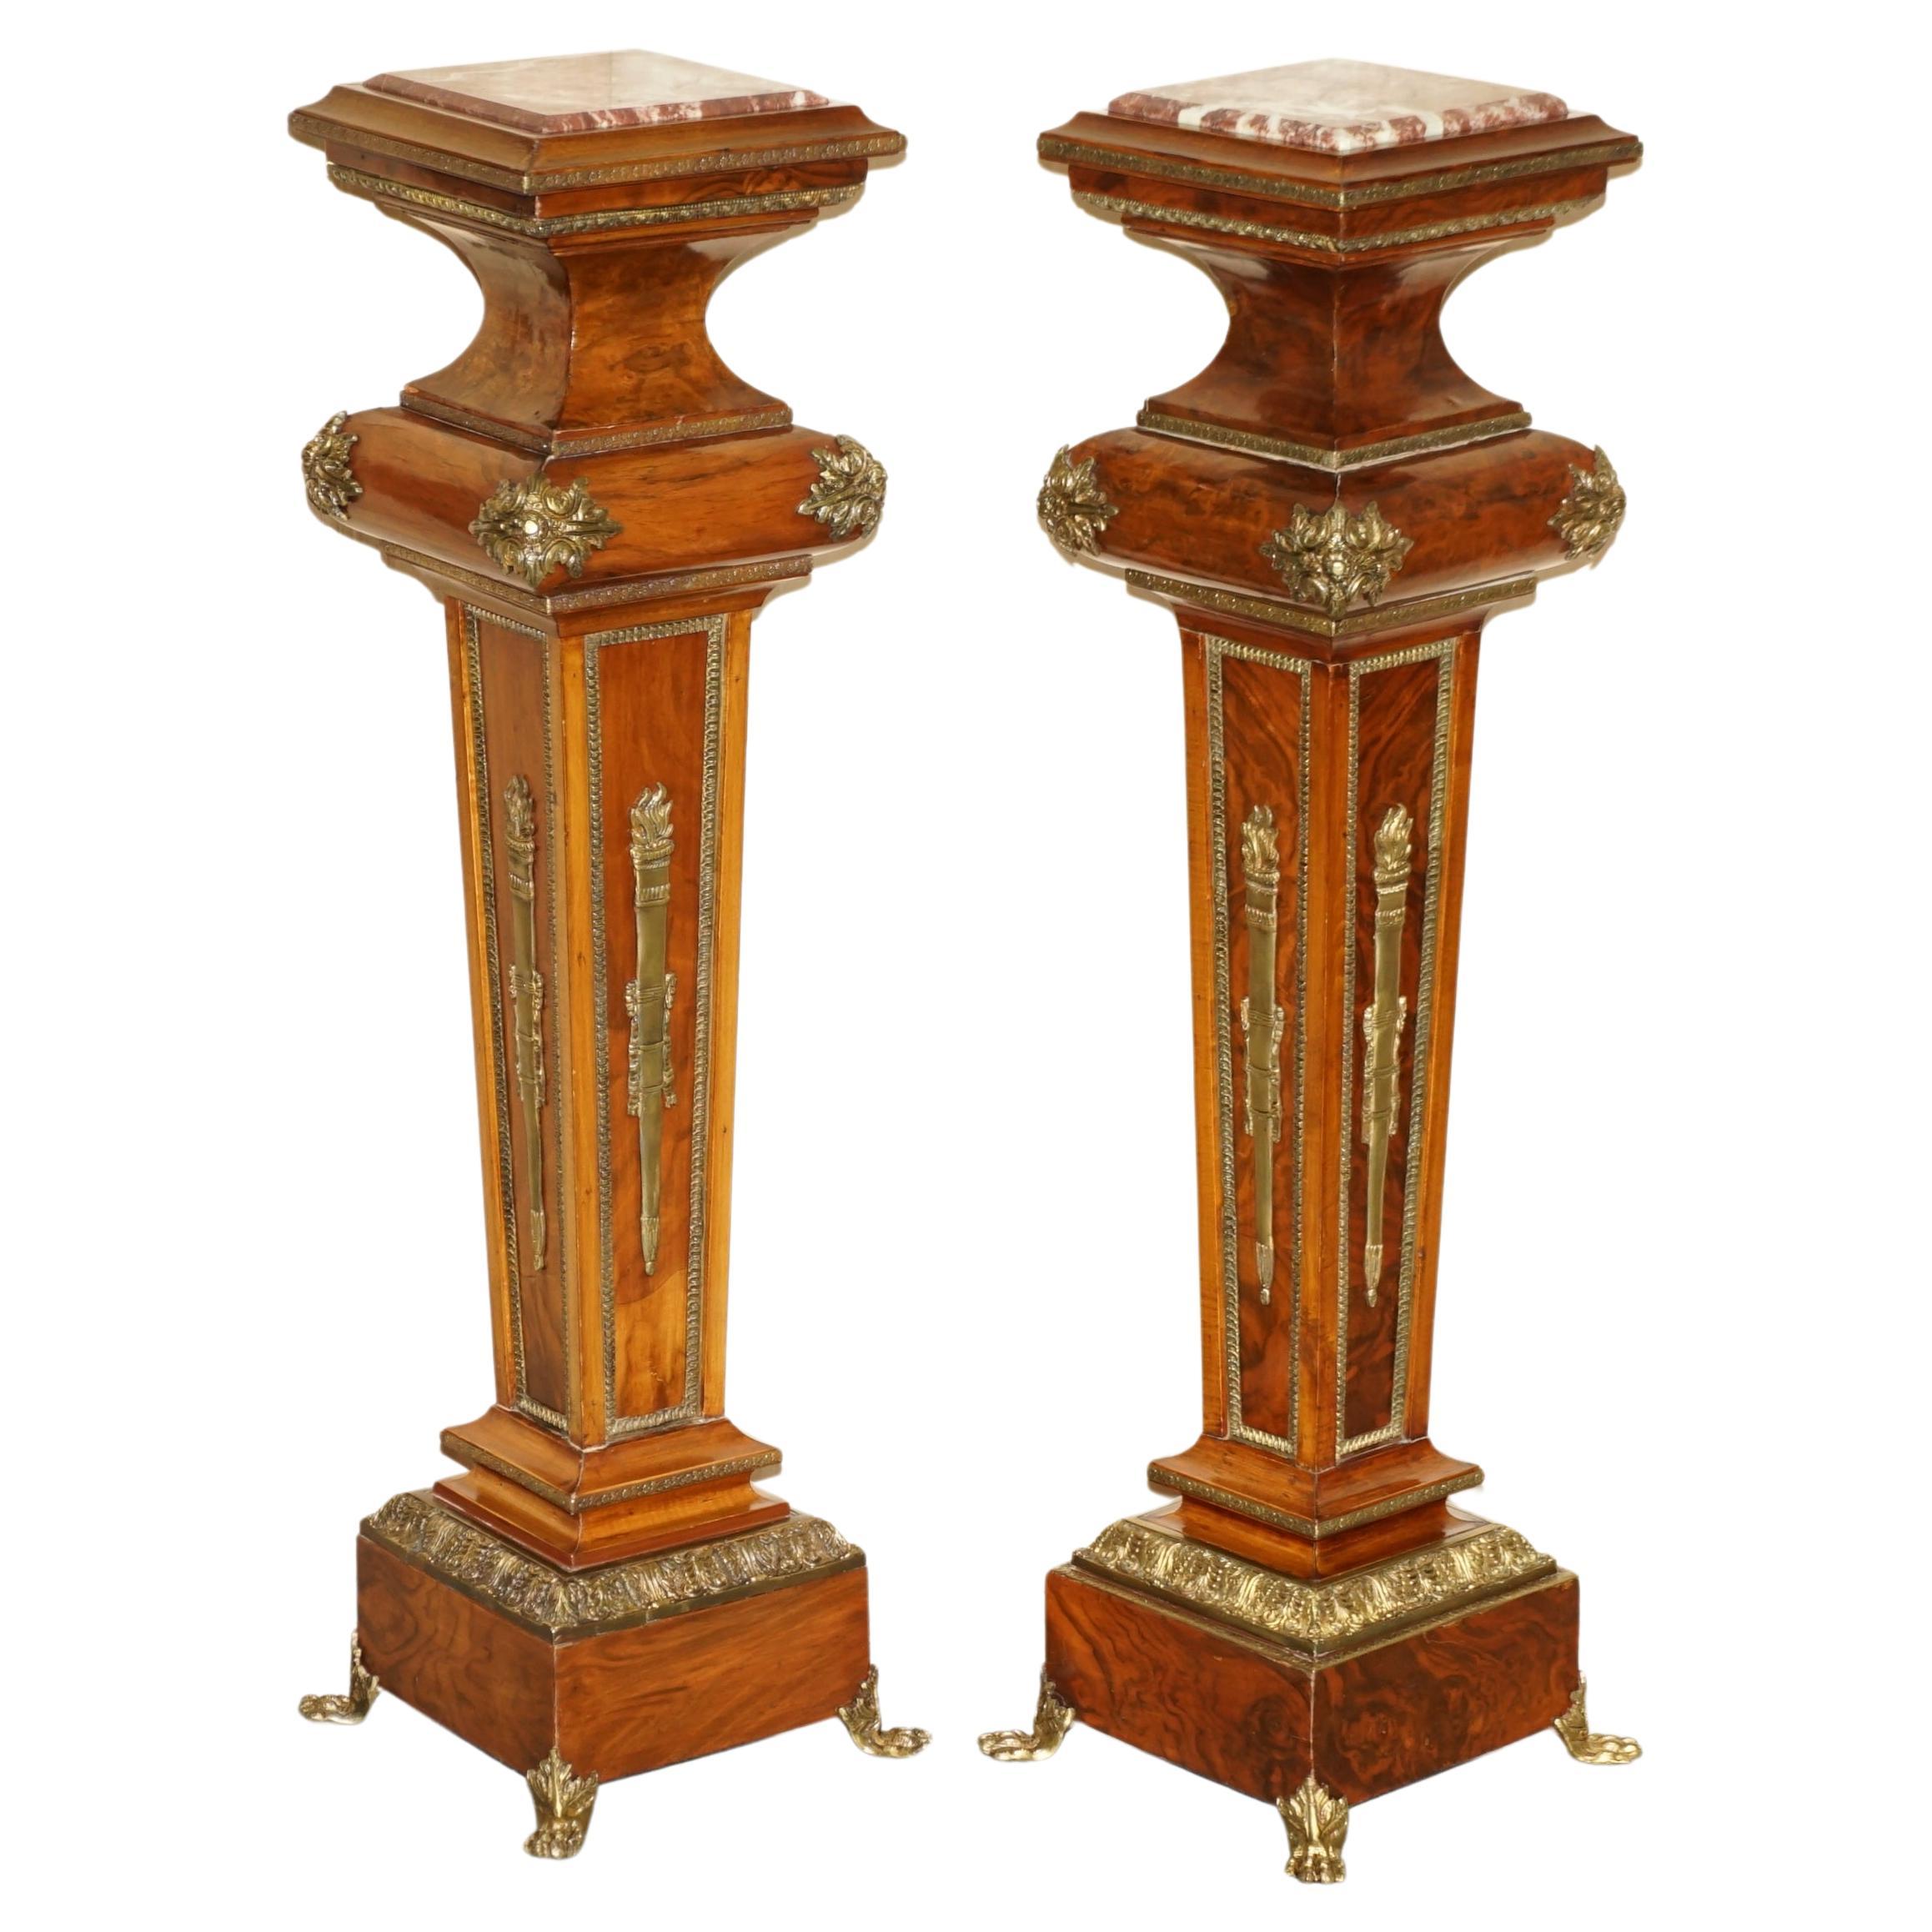 Pair of Antique Gilt Bronze Mounted Burr Walnut Marble Topped Pedestal Stands For Sale